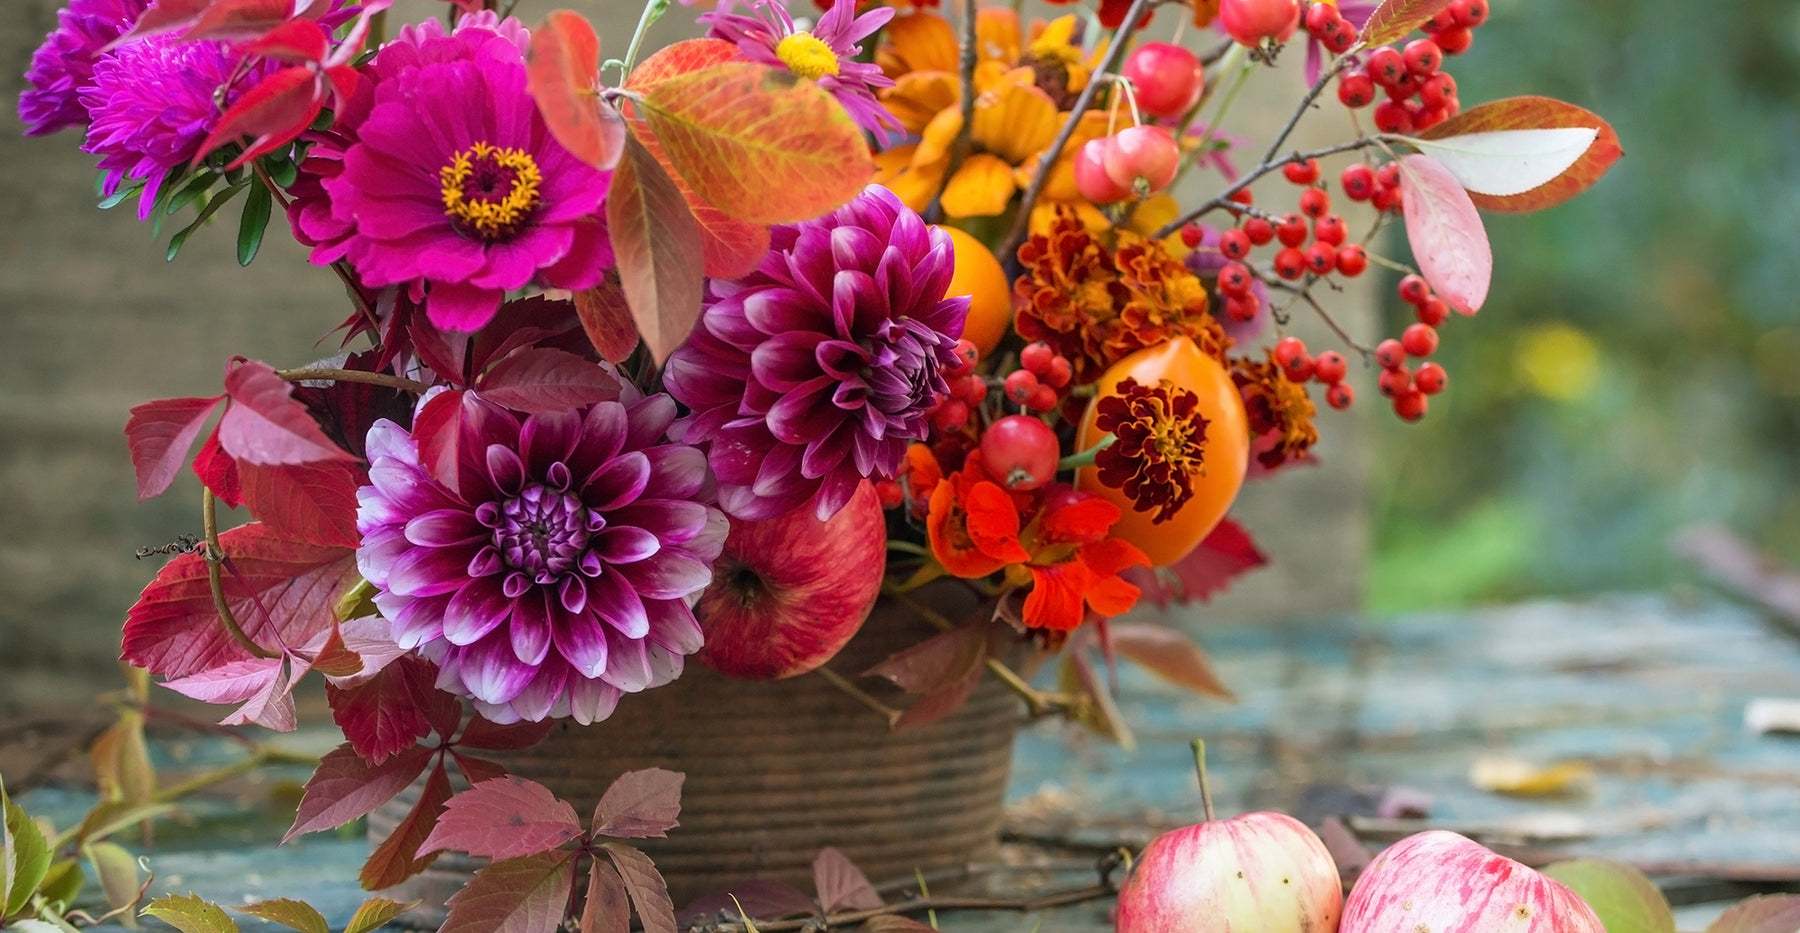 Benefits of Artificial Fall Flowers & Decorations